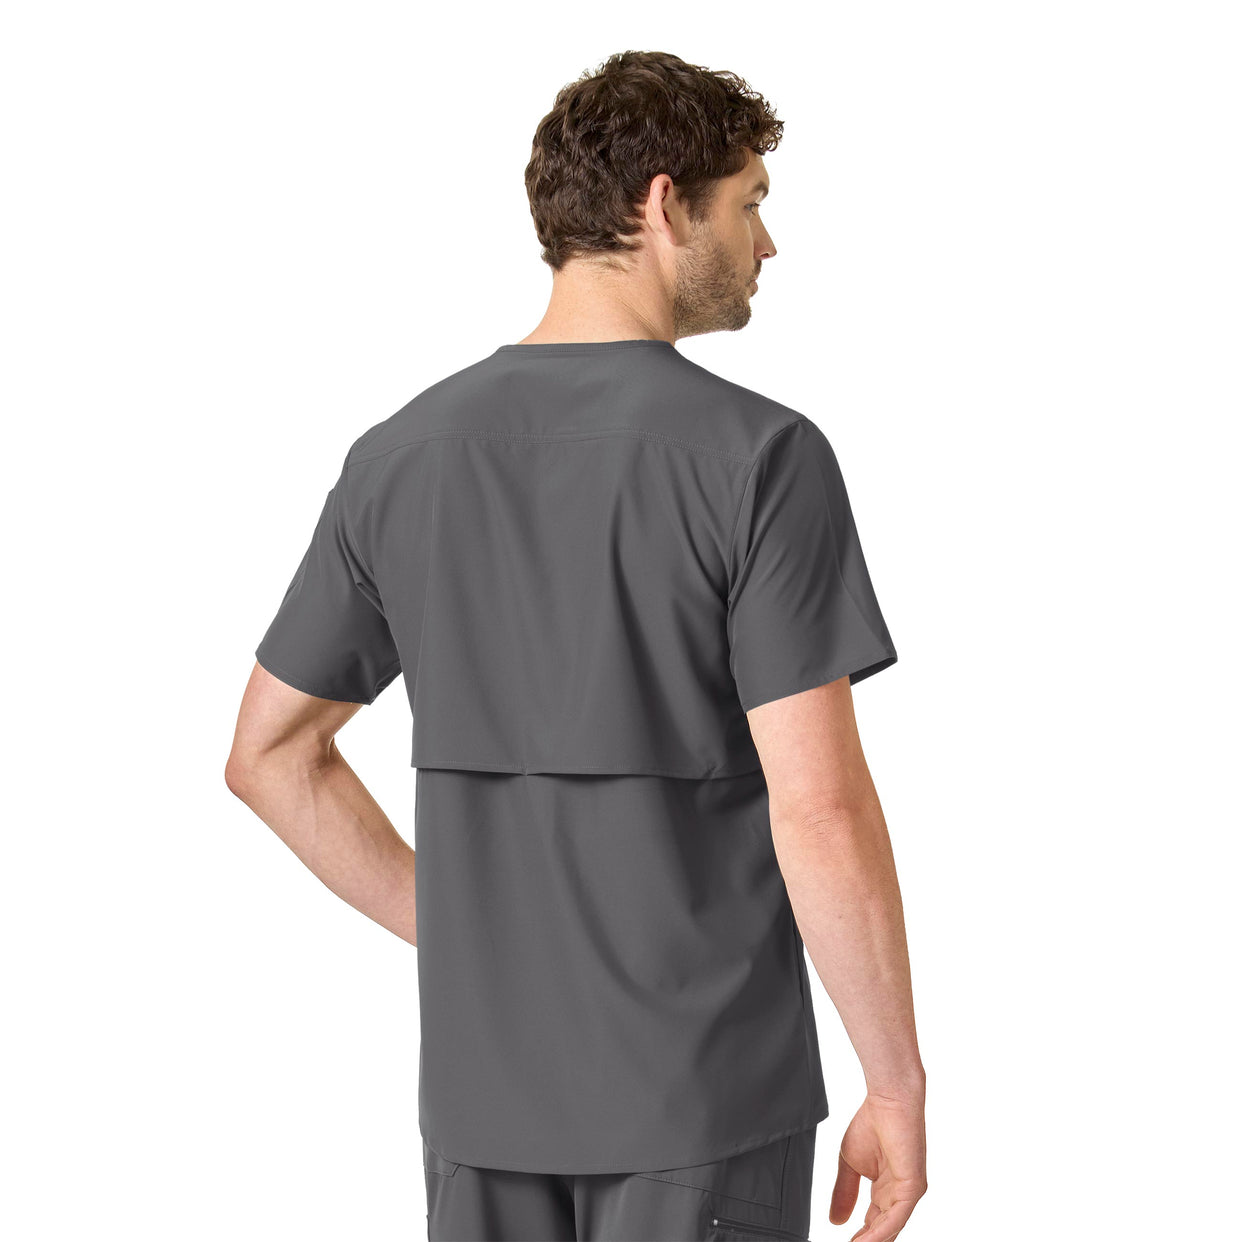 Force Liberty Men's Twill Chest Pocket Scrub Top Pewter back view